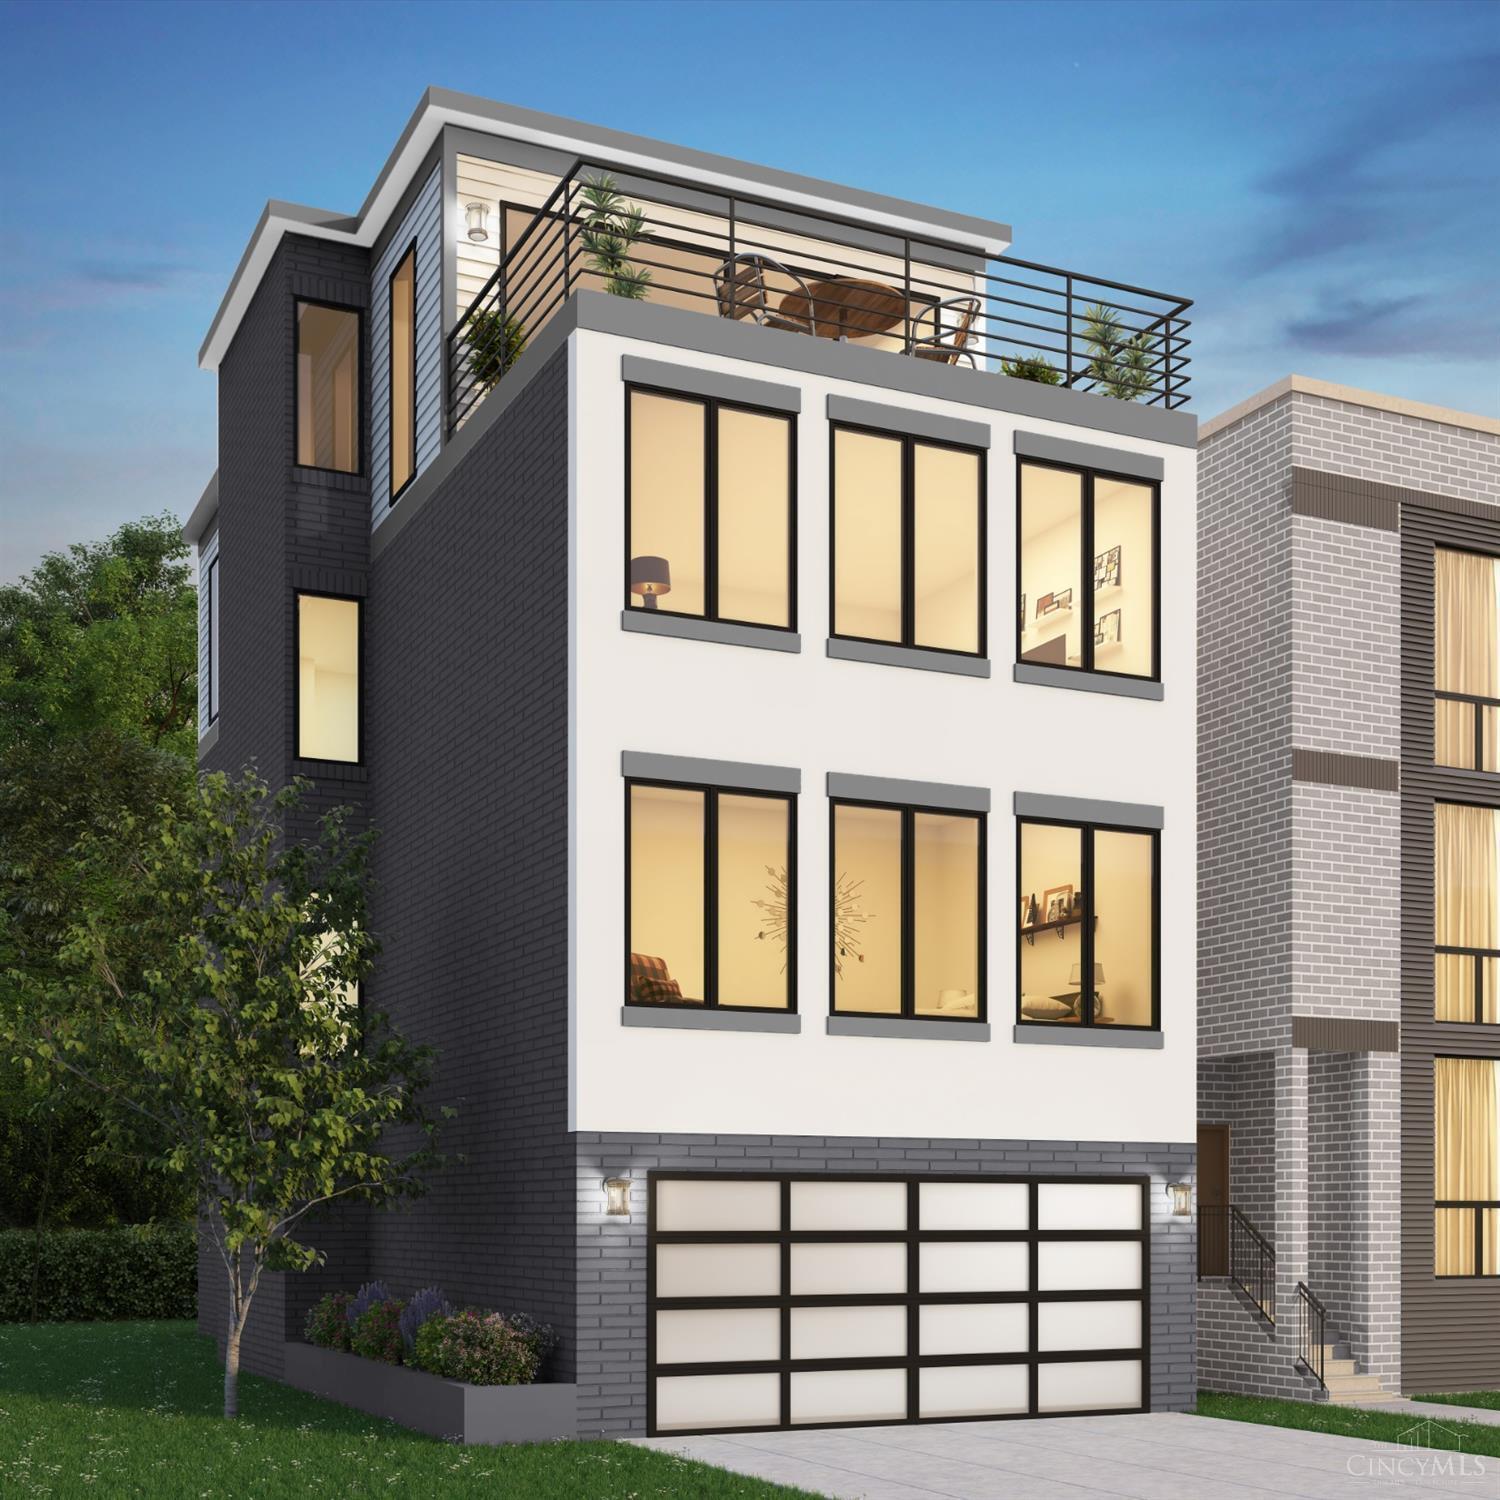 Everything is happening in the East End! Amazing city & river views from these modern inspired homes that offer balconies - you can see for miles! These homes are close to everything & offer a tax abatement & no HOA fees. Built by custom craftsman Terry Inman  these homes will feature great finishes & quality!